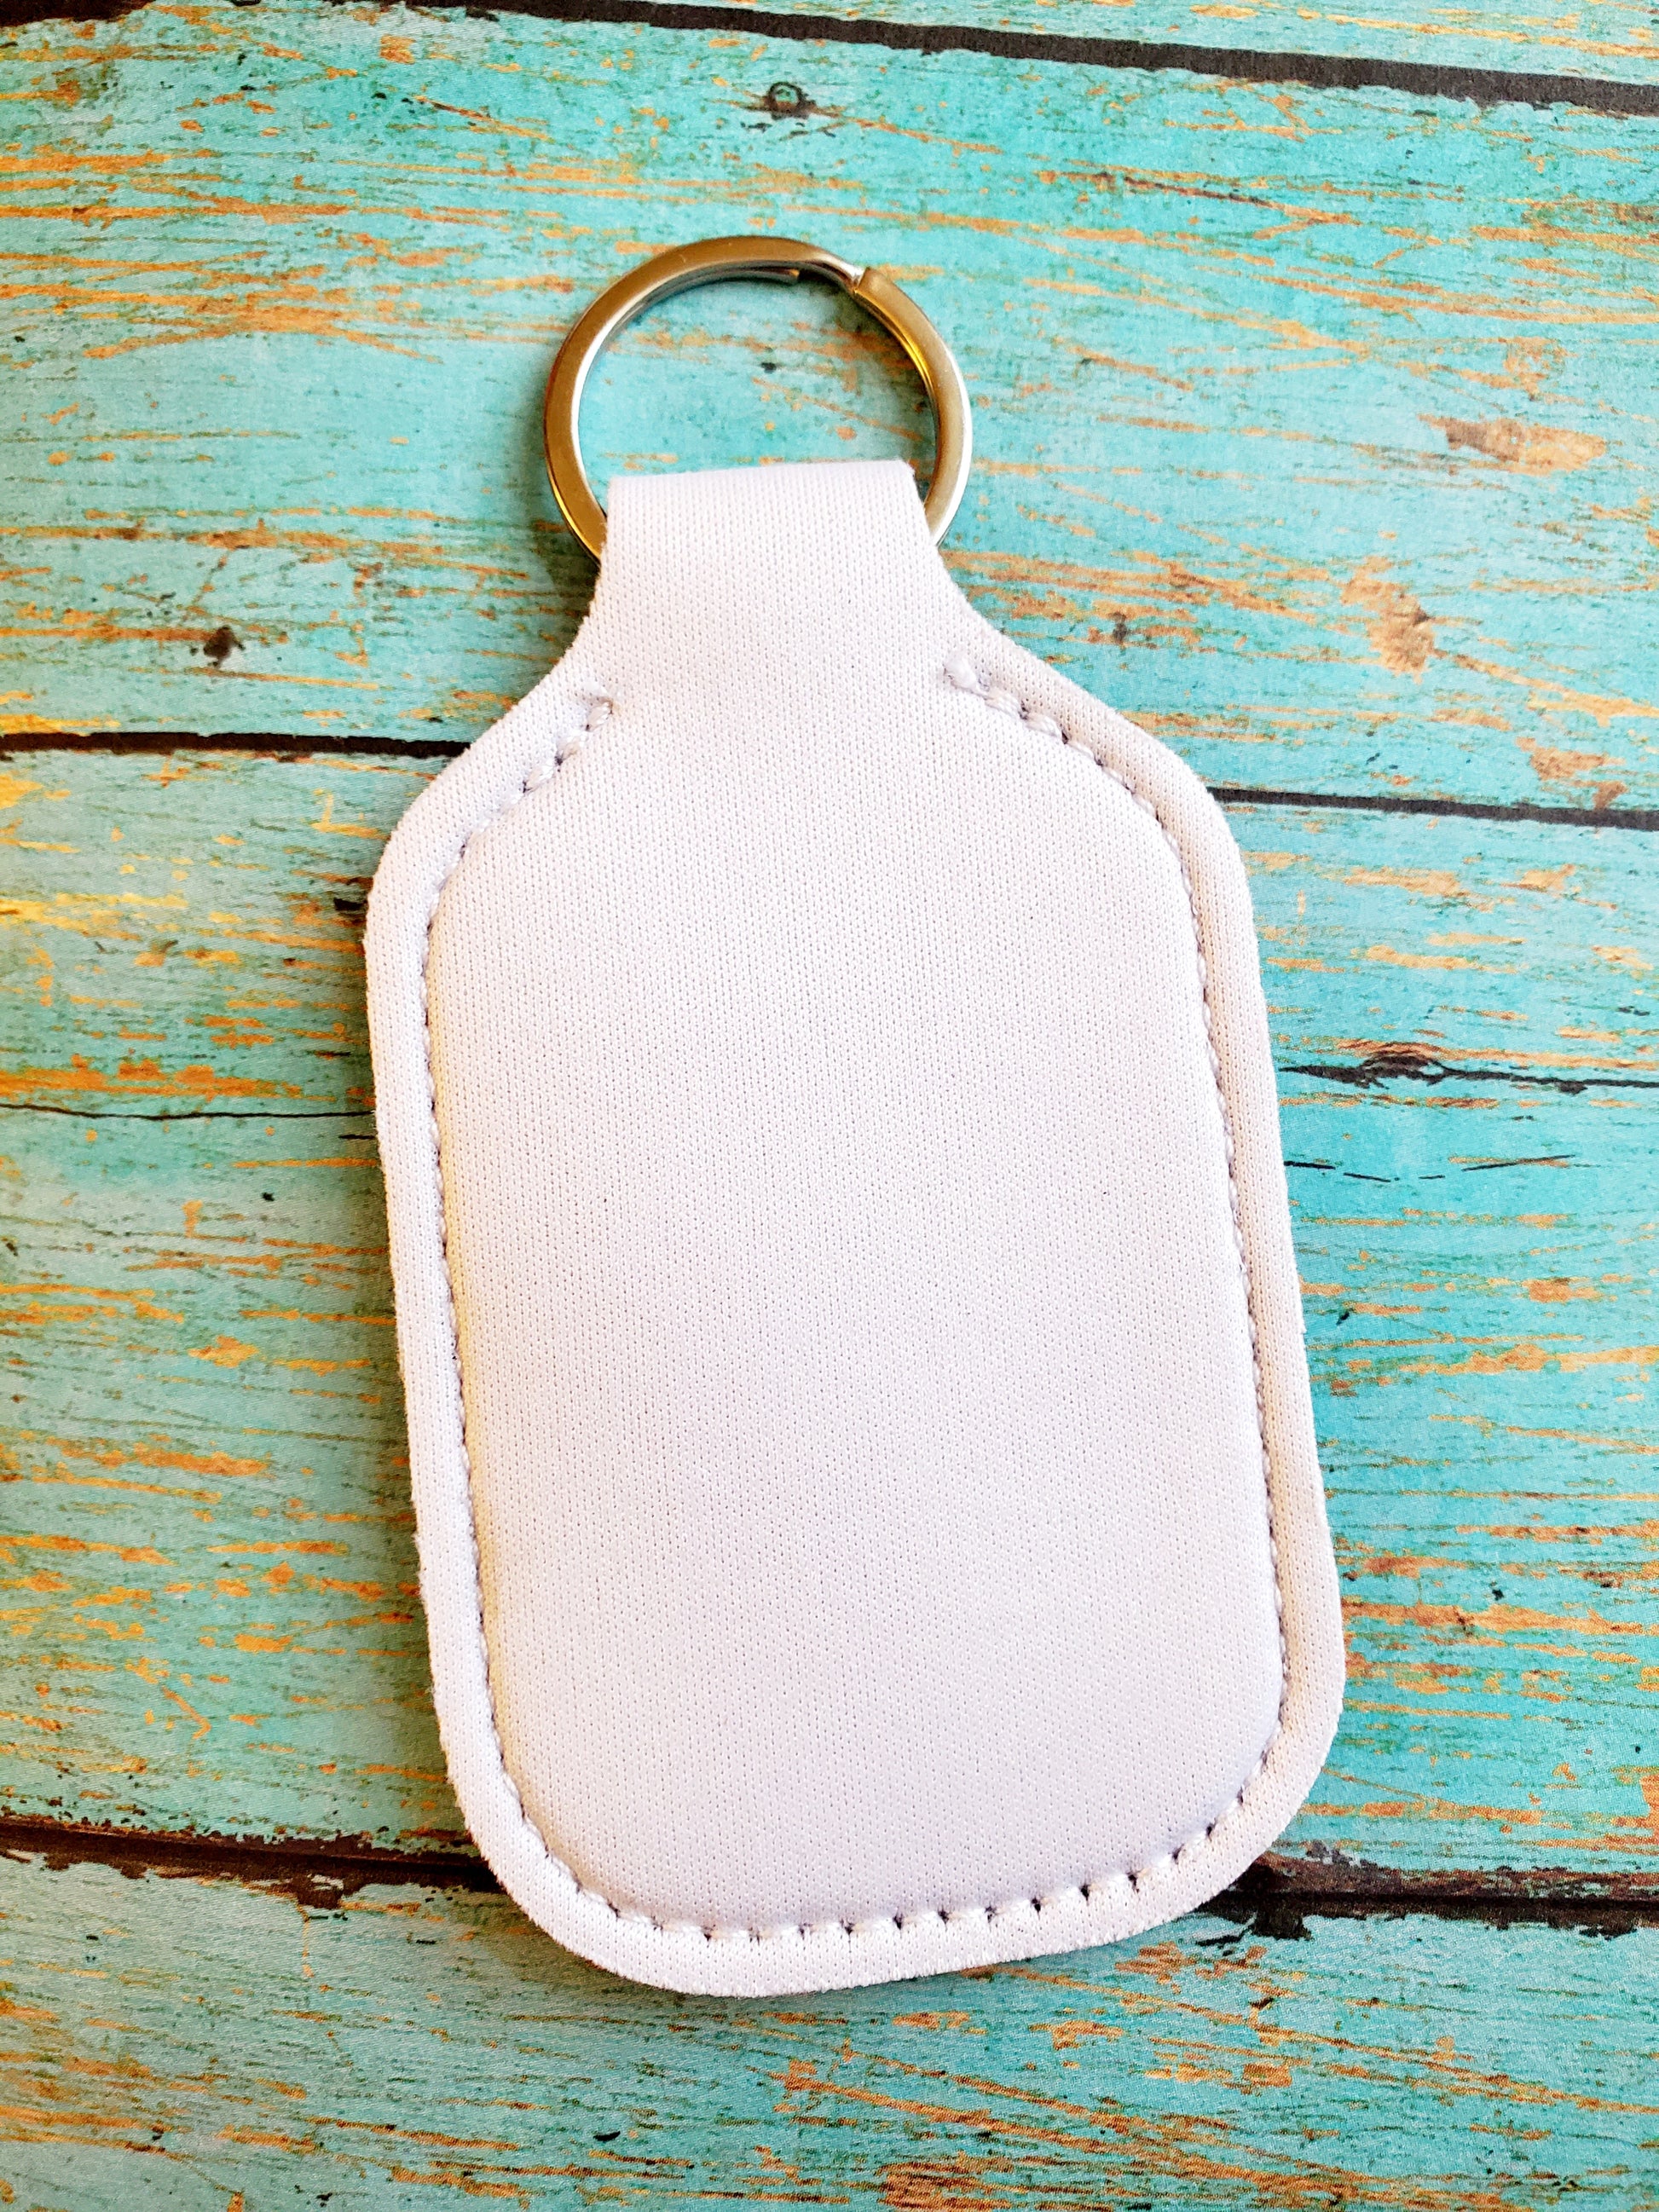 How to Sublimate Neoprene Hand Sanitizer Keychains 